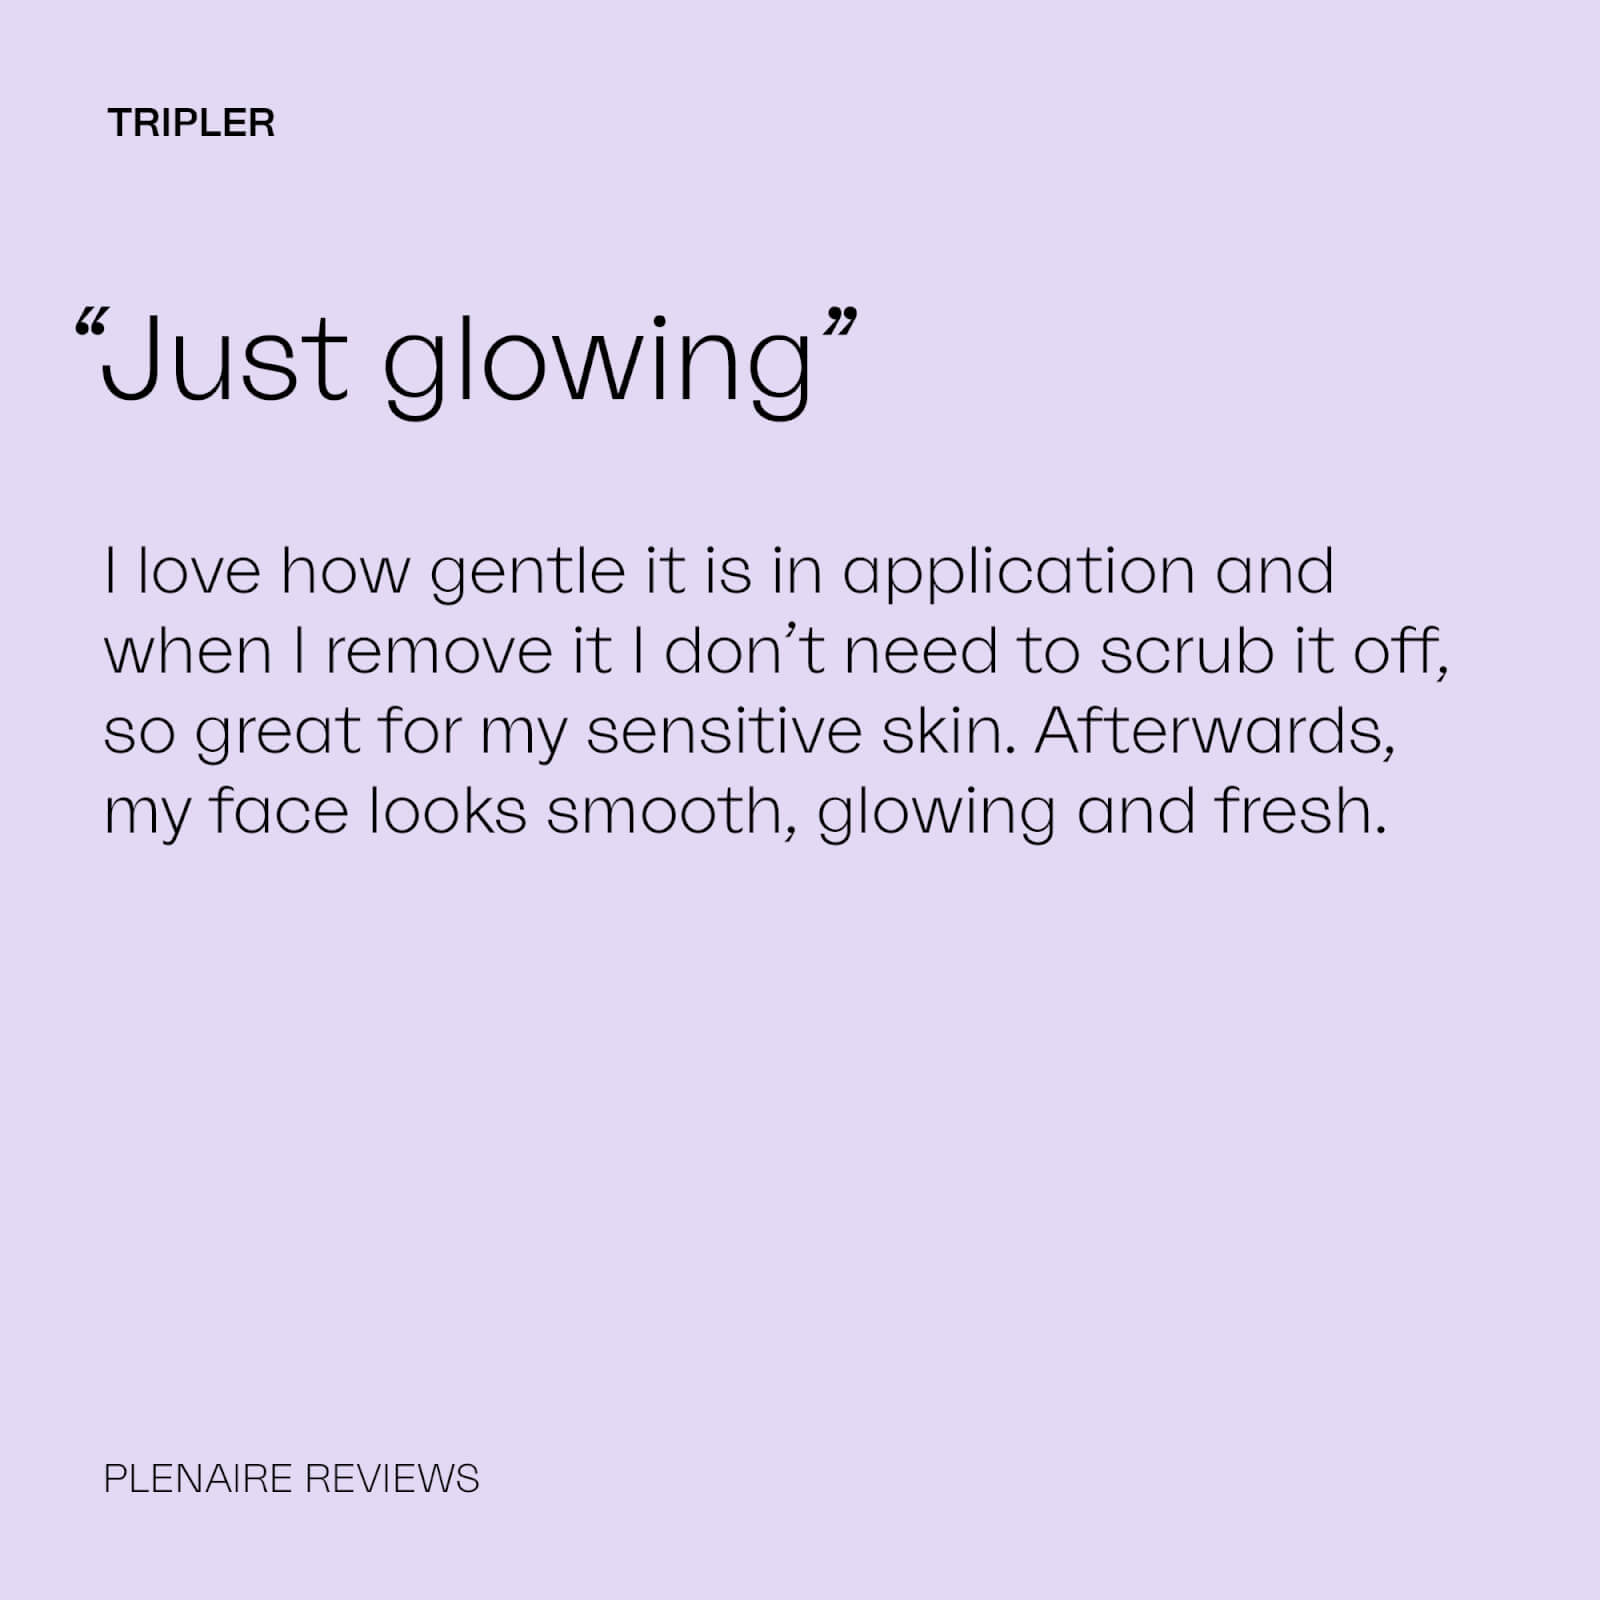 TRIPLER
              “Just glowing”
              I love how gentle it is in application and when I remove it I don't need to scrub it off, so great for my sensitive skin. Afterwards, my face looks smooth, glowing and fresh.
              PLENAIRE REVIEWS